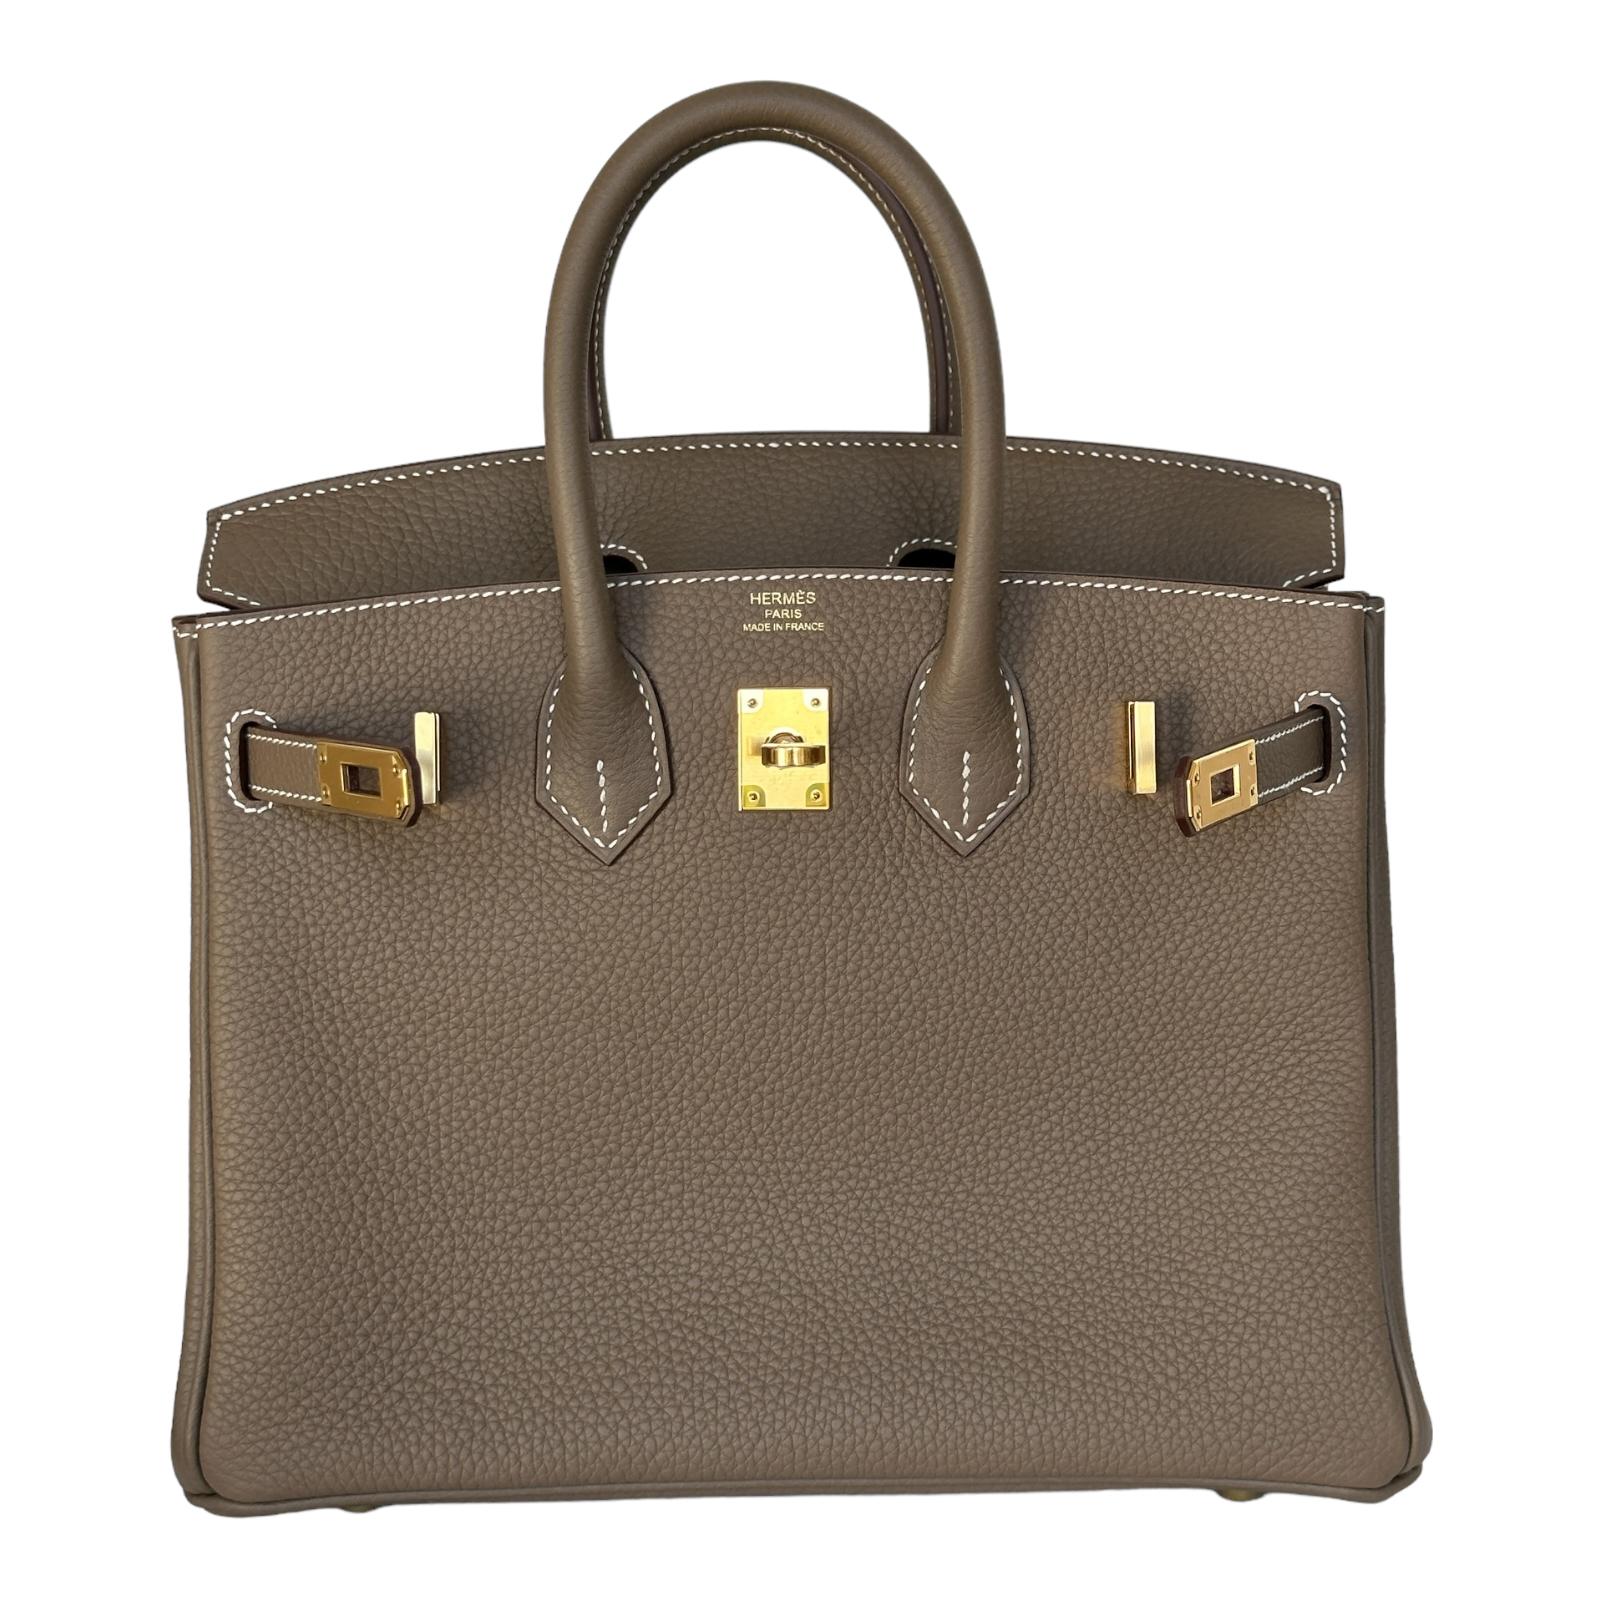 Hermes Birkin 25cm
Etoupe Togo Leather
Gold Hardware
The interior is lined with Etoupe chevre and has one zip pocket with an Hermes engraved zipper pull and an open pocket on the opposite side.

 

Collection: U

 

Origin: France

 

Condition: